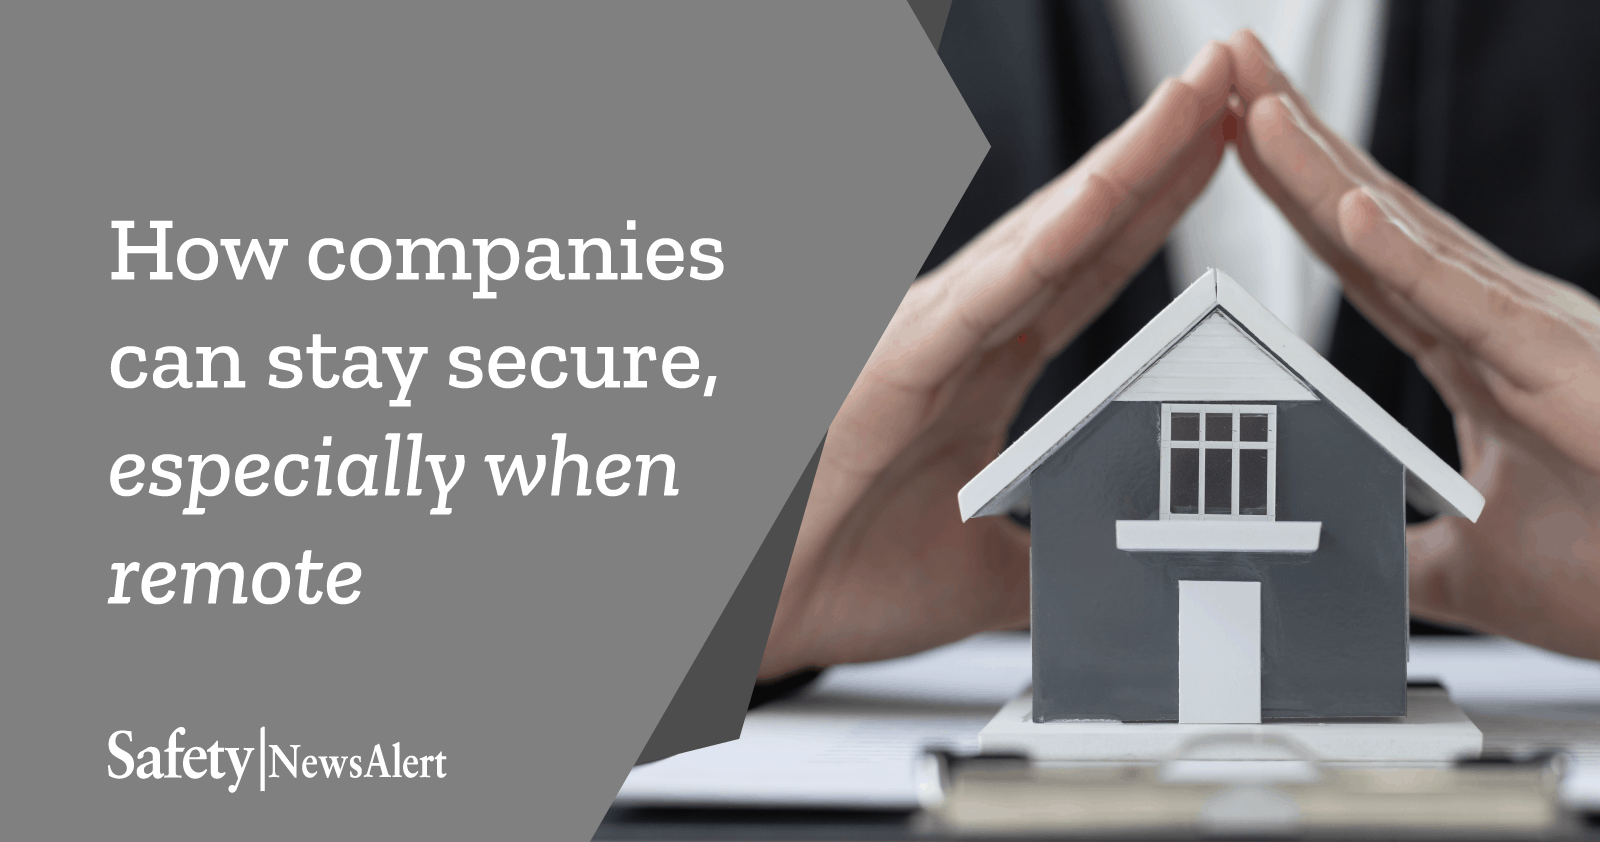 How companies can stay secure, especially when remote